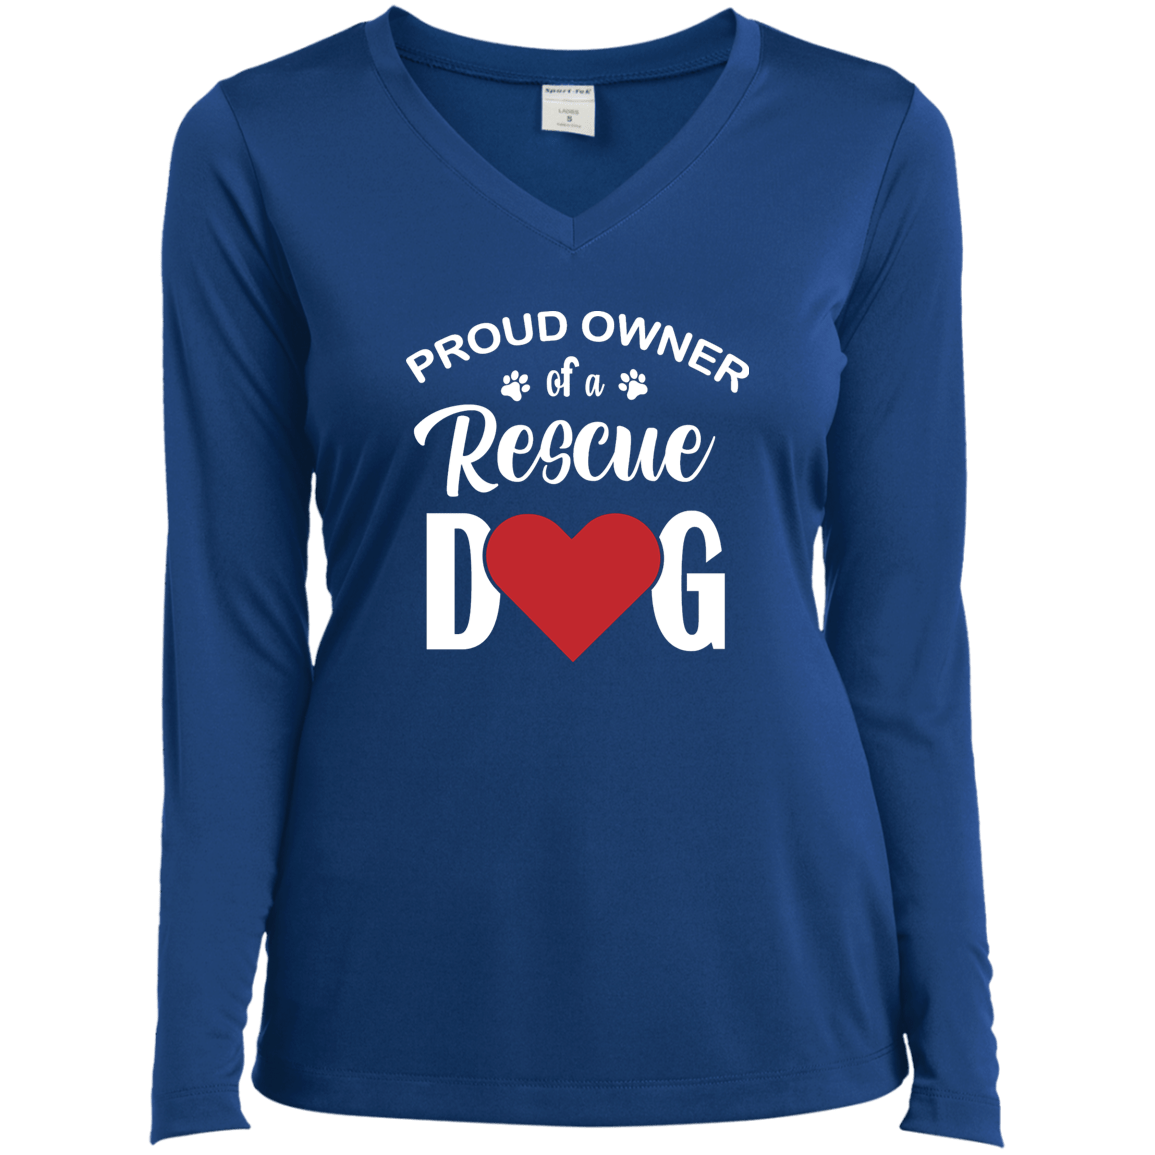 Proud Owner Of A Rescue Dog - Long Sleeve Ladies V Neck.